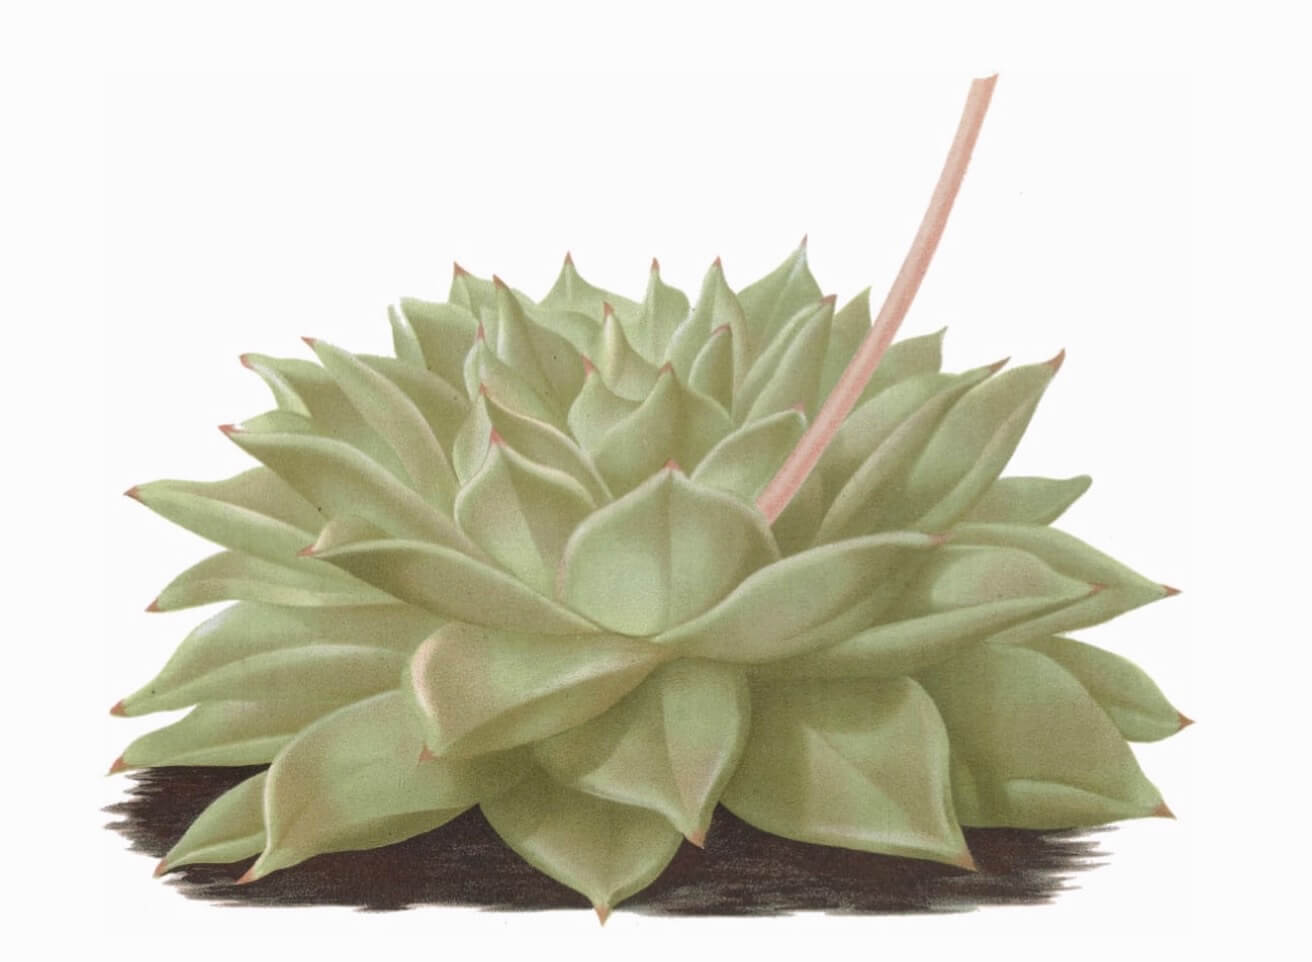 Moulded-wax succulent Echeveria agavoides aka wax agave